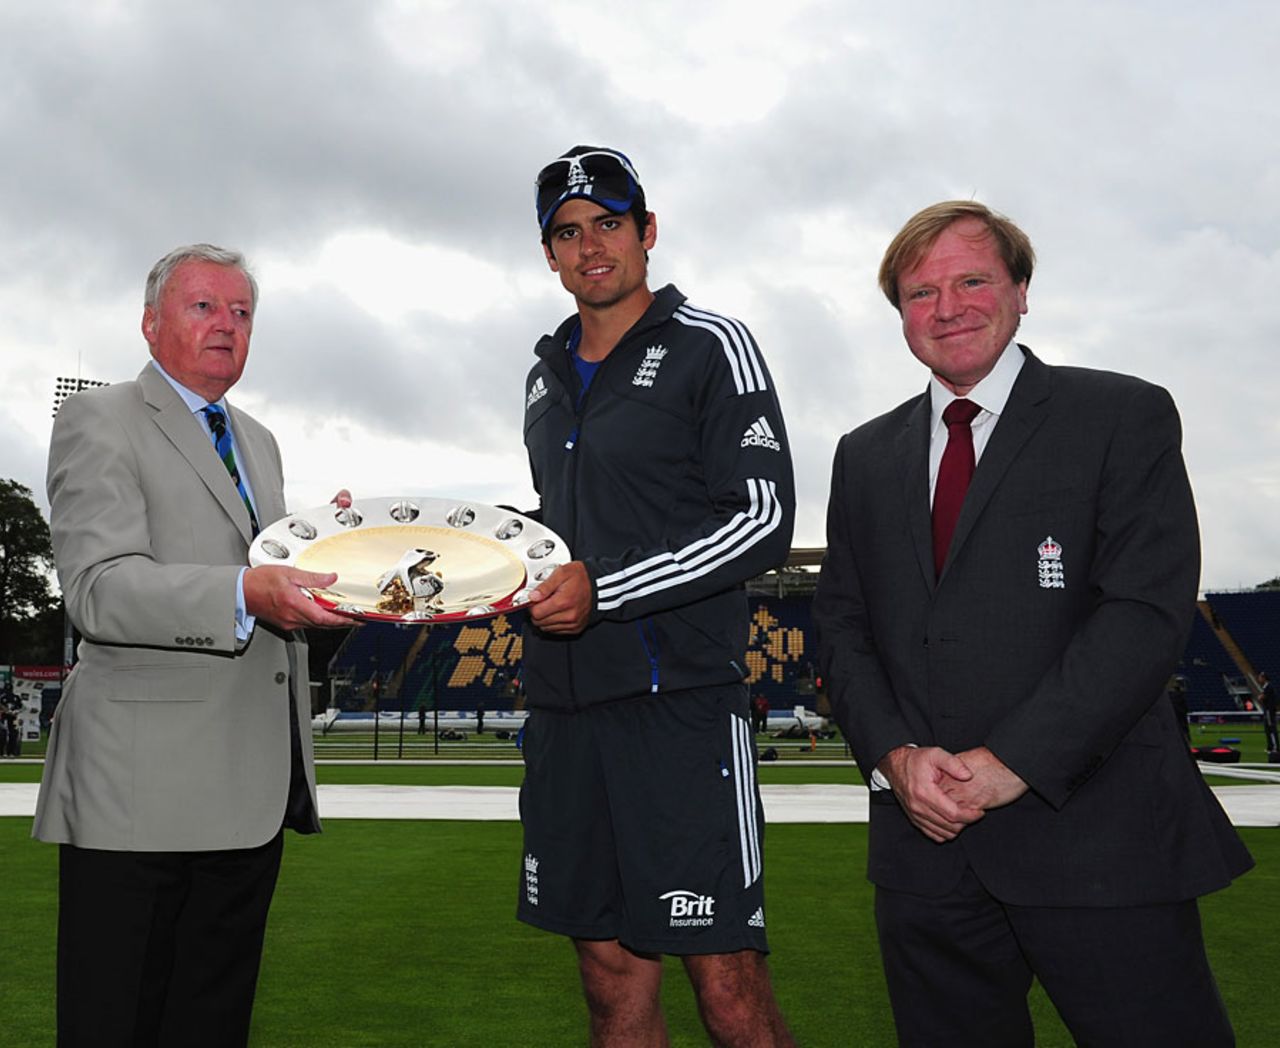 Alastair Cook was presented with the ODI shield before play, England v South Africa, 1st NatWest ODI, Cardiff, August 24, 2012